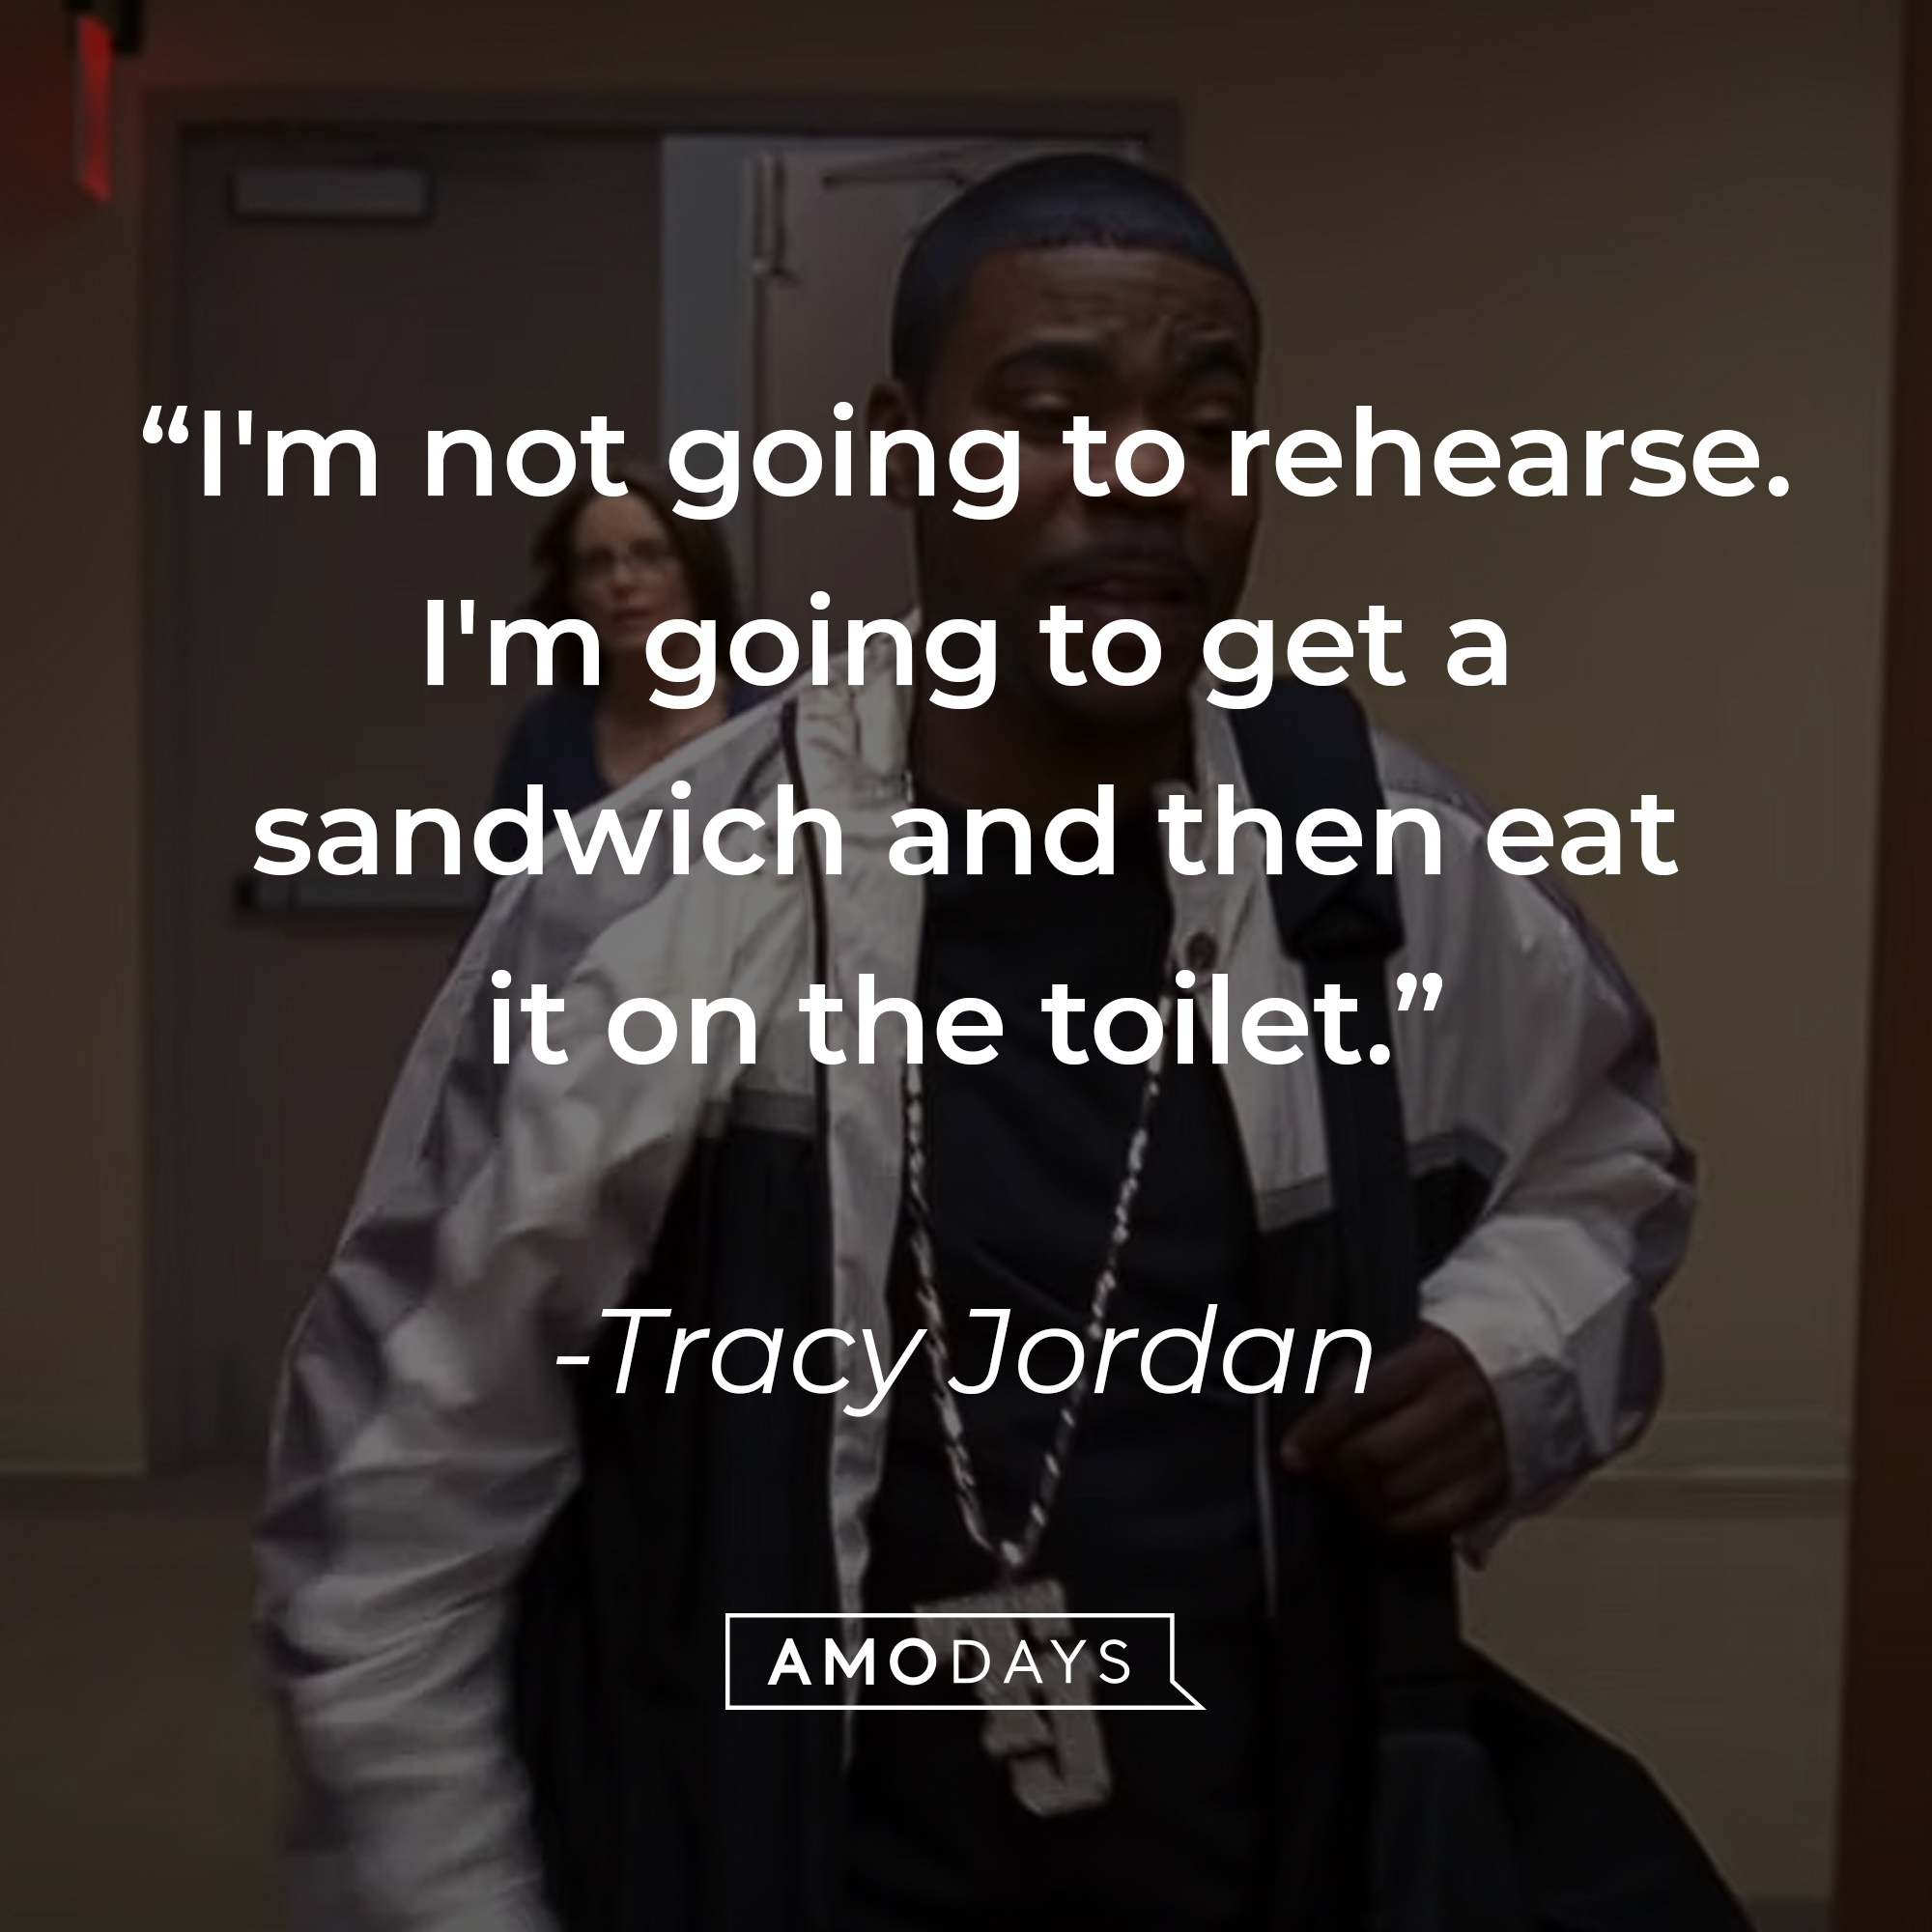 Tracy Jordan's quote, "I'm not going to rehearse. I'm going to get a sandwich and then eat it on the toilet." | Source: facebook.com/30RockTV